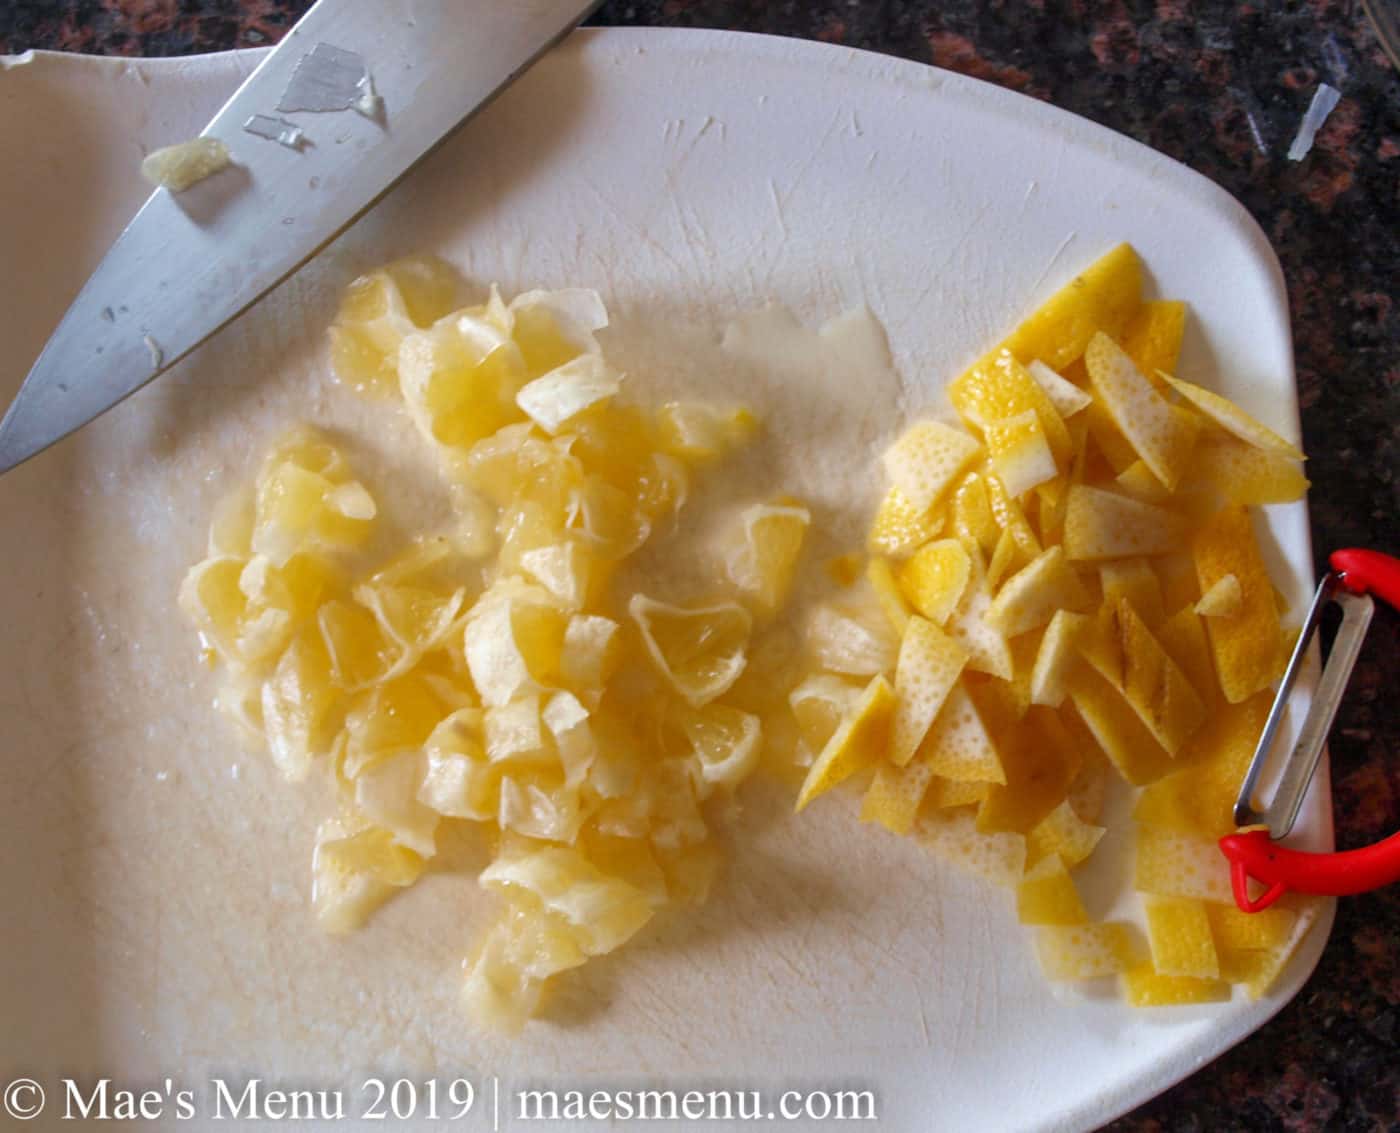 Chopped peeled lemons and chopped lemon zest on a white cutting board. Chefs knife at the top and red vegetable peeler on the right.